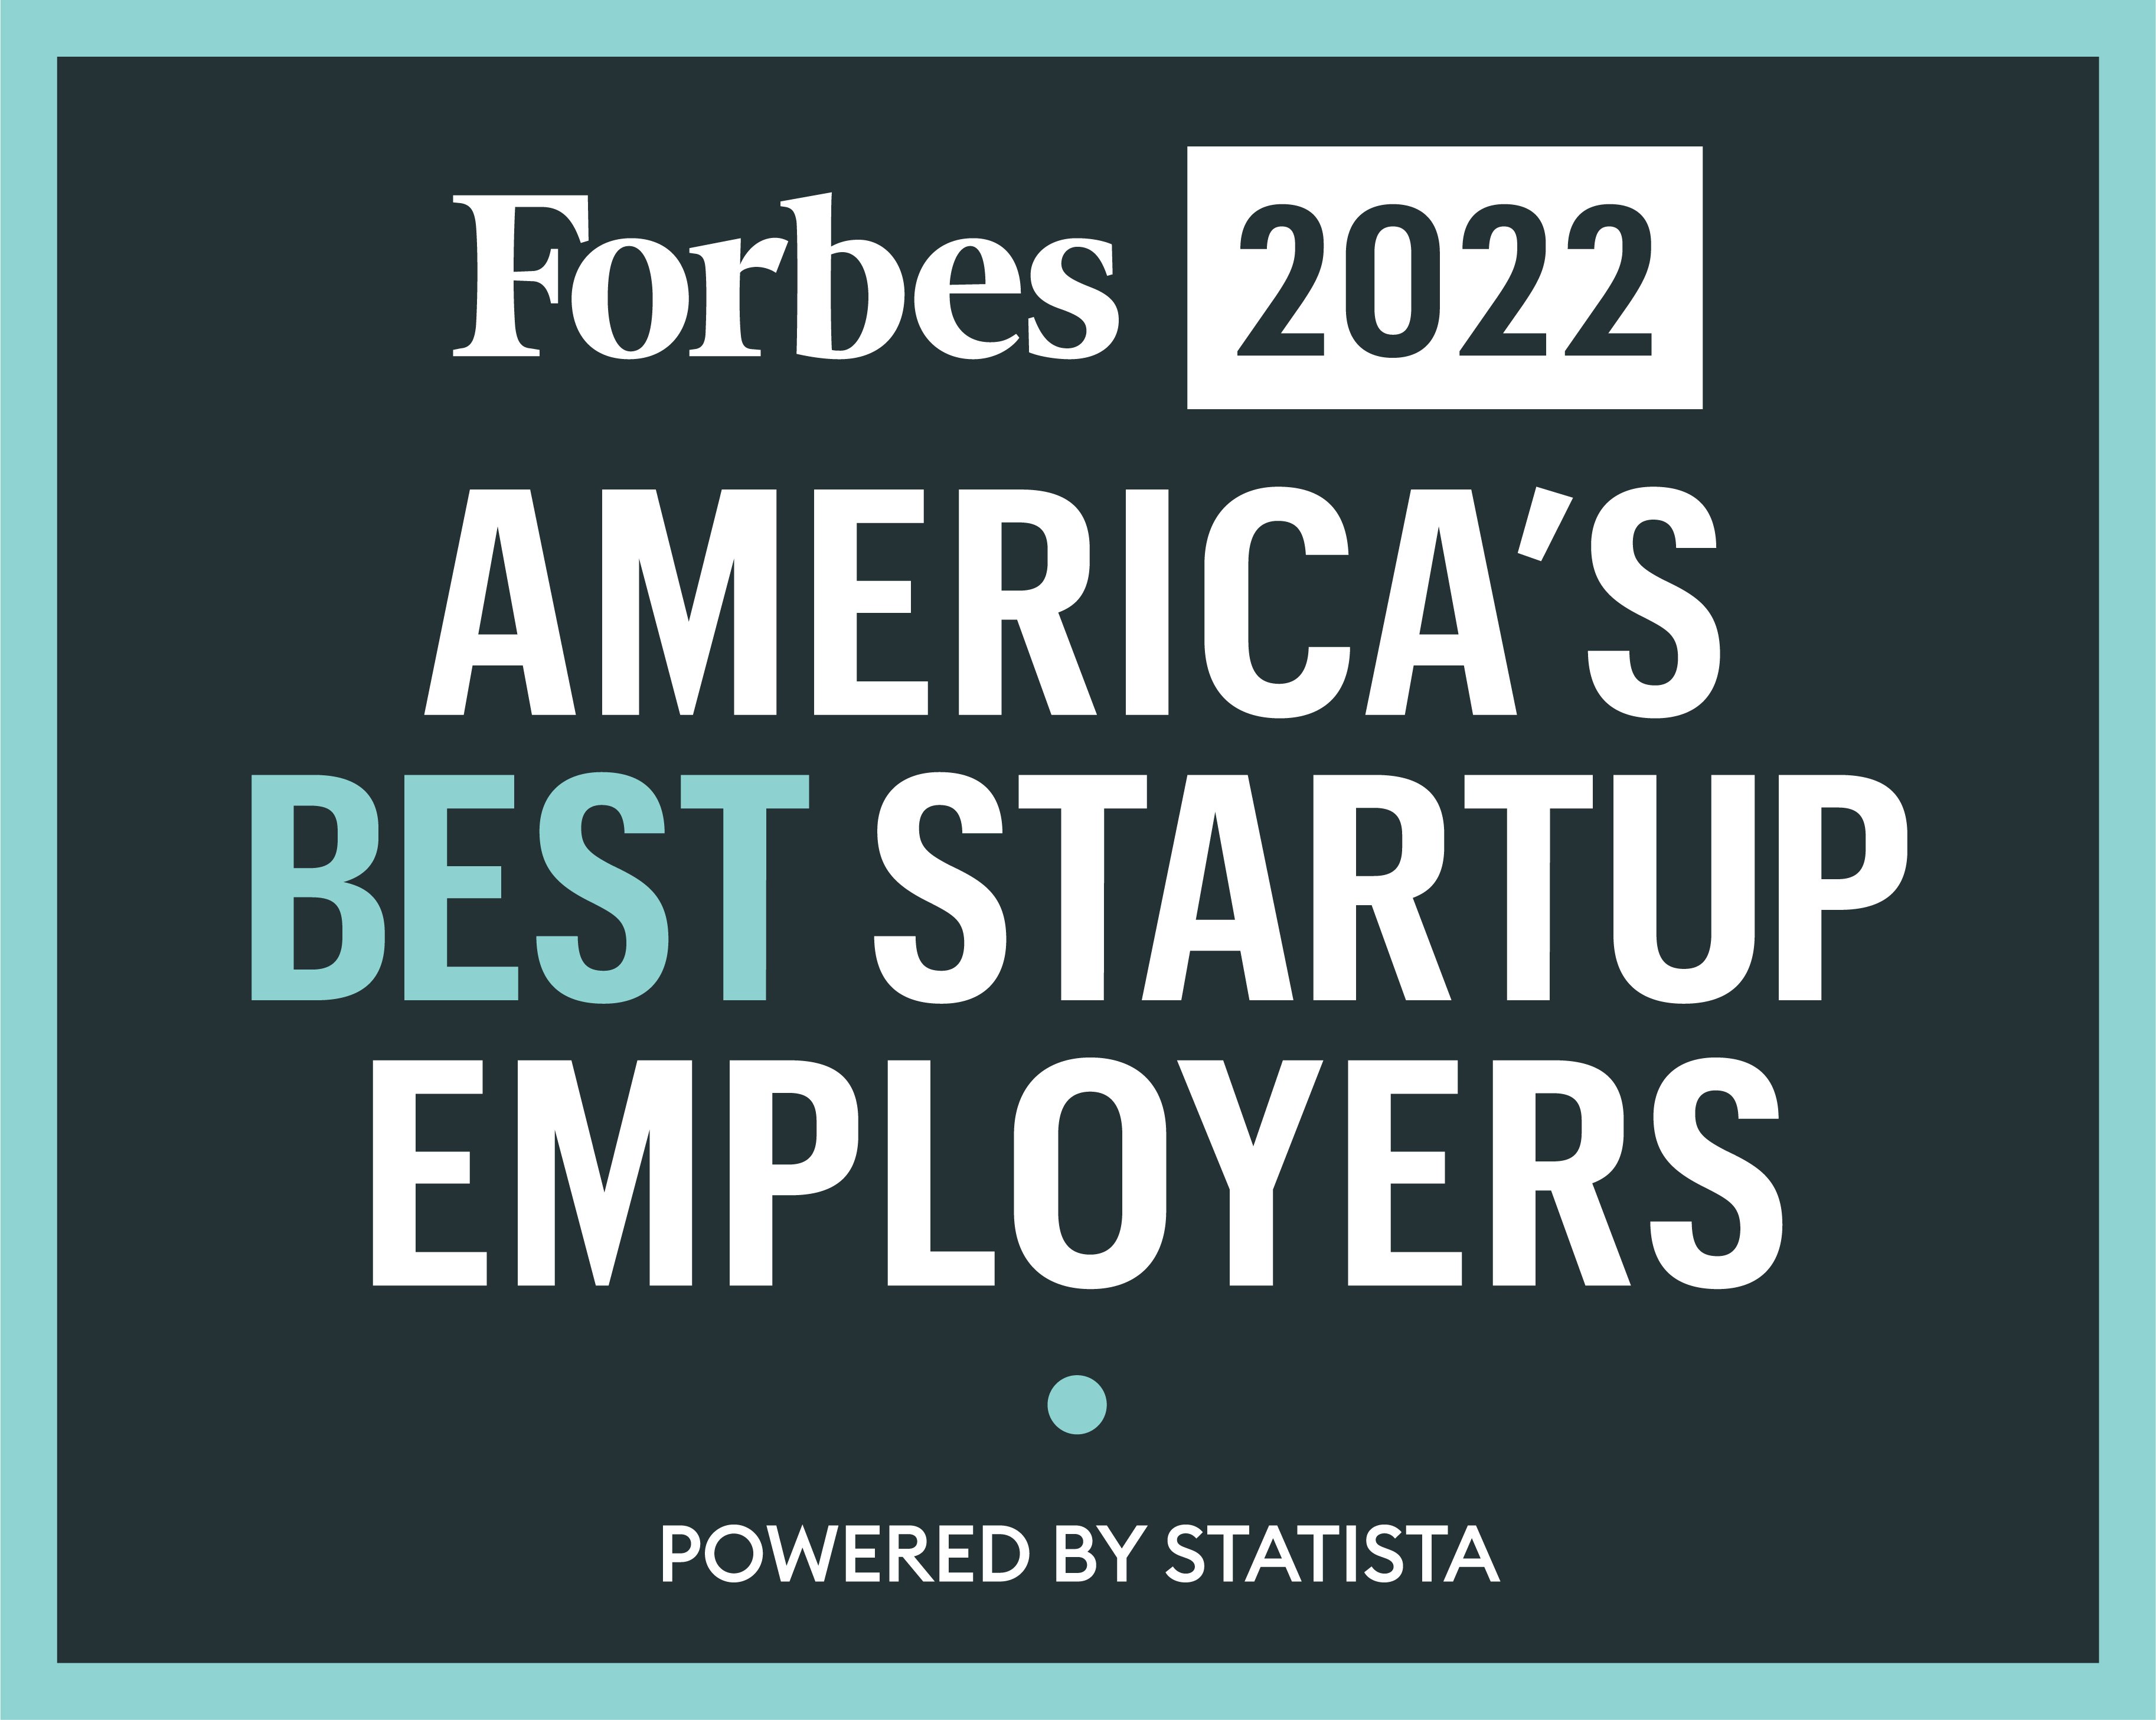 Forbes 2022 America's Best Startup Employers award